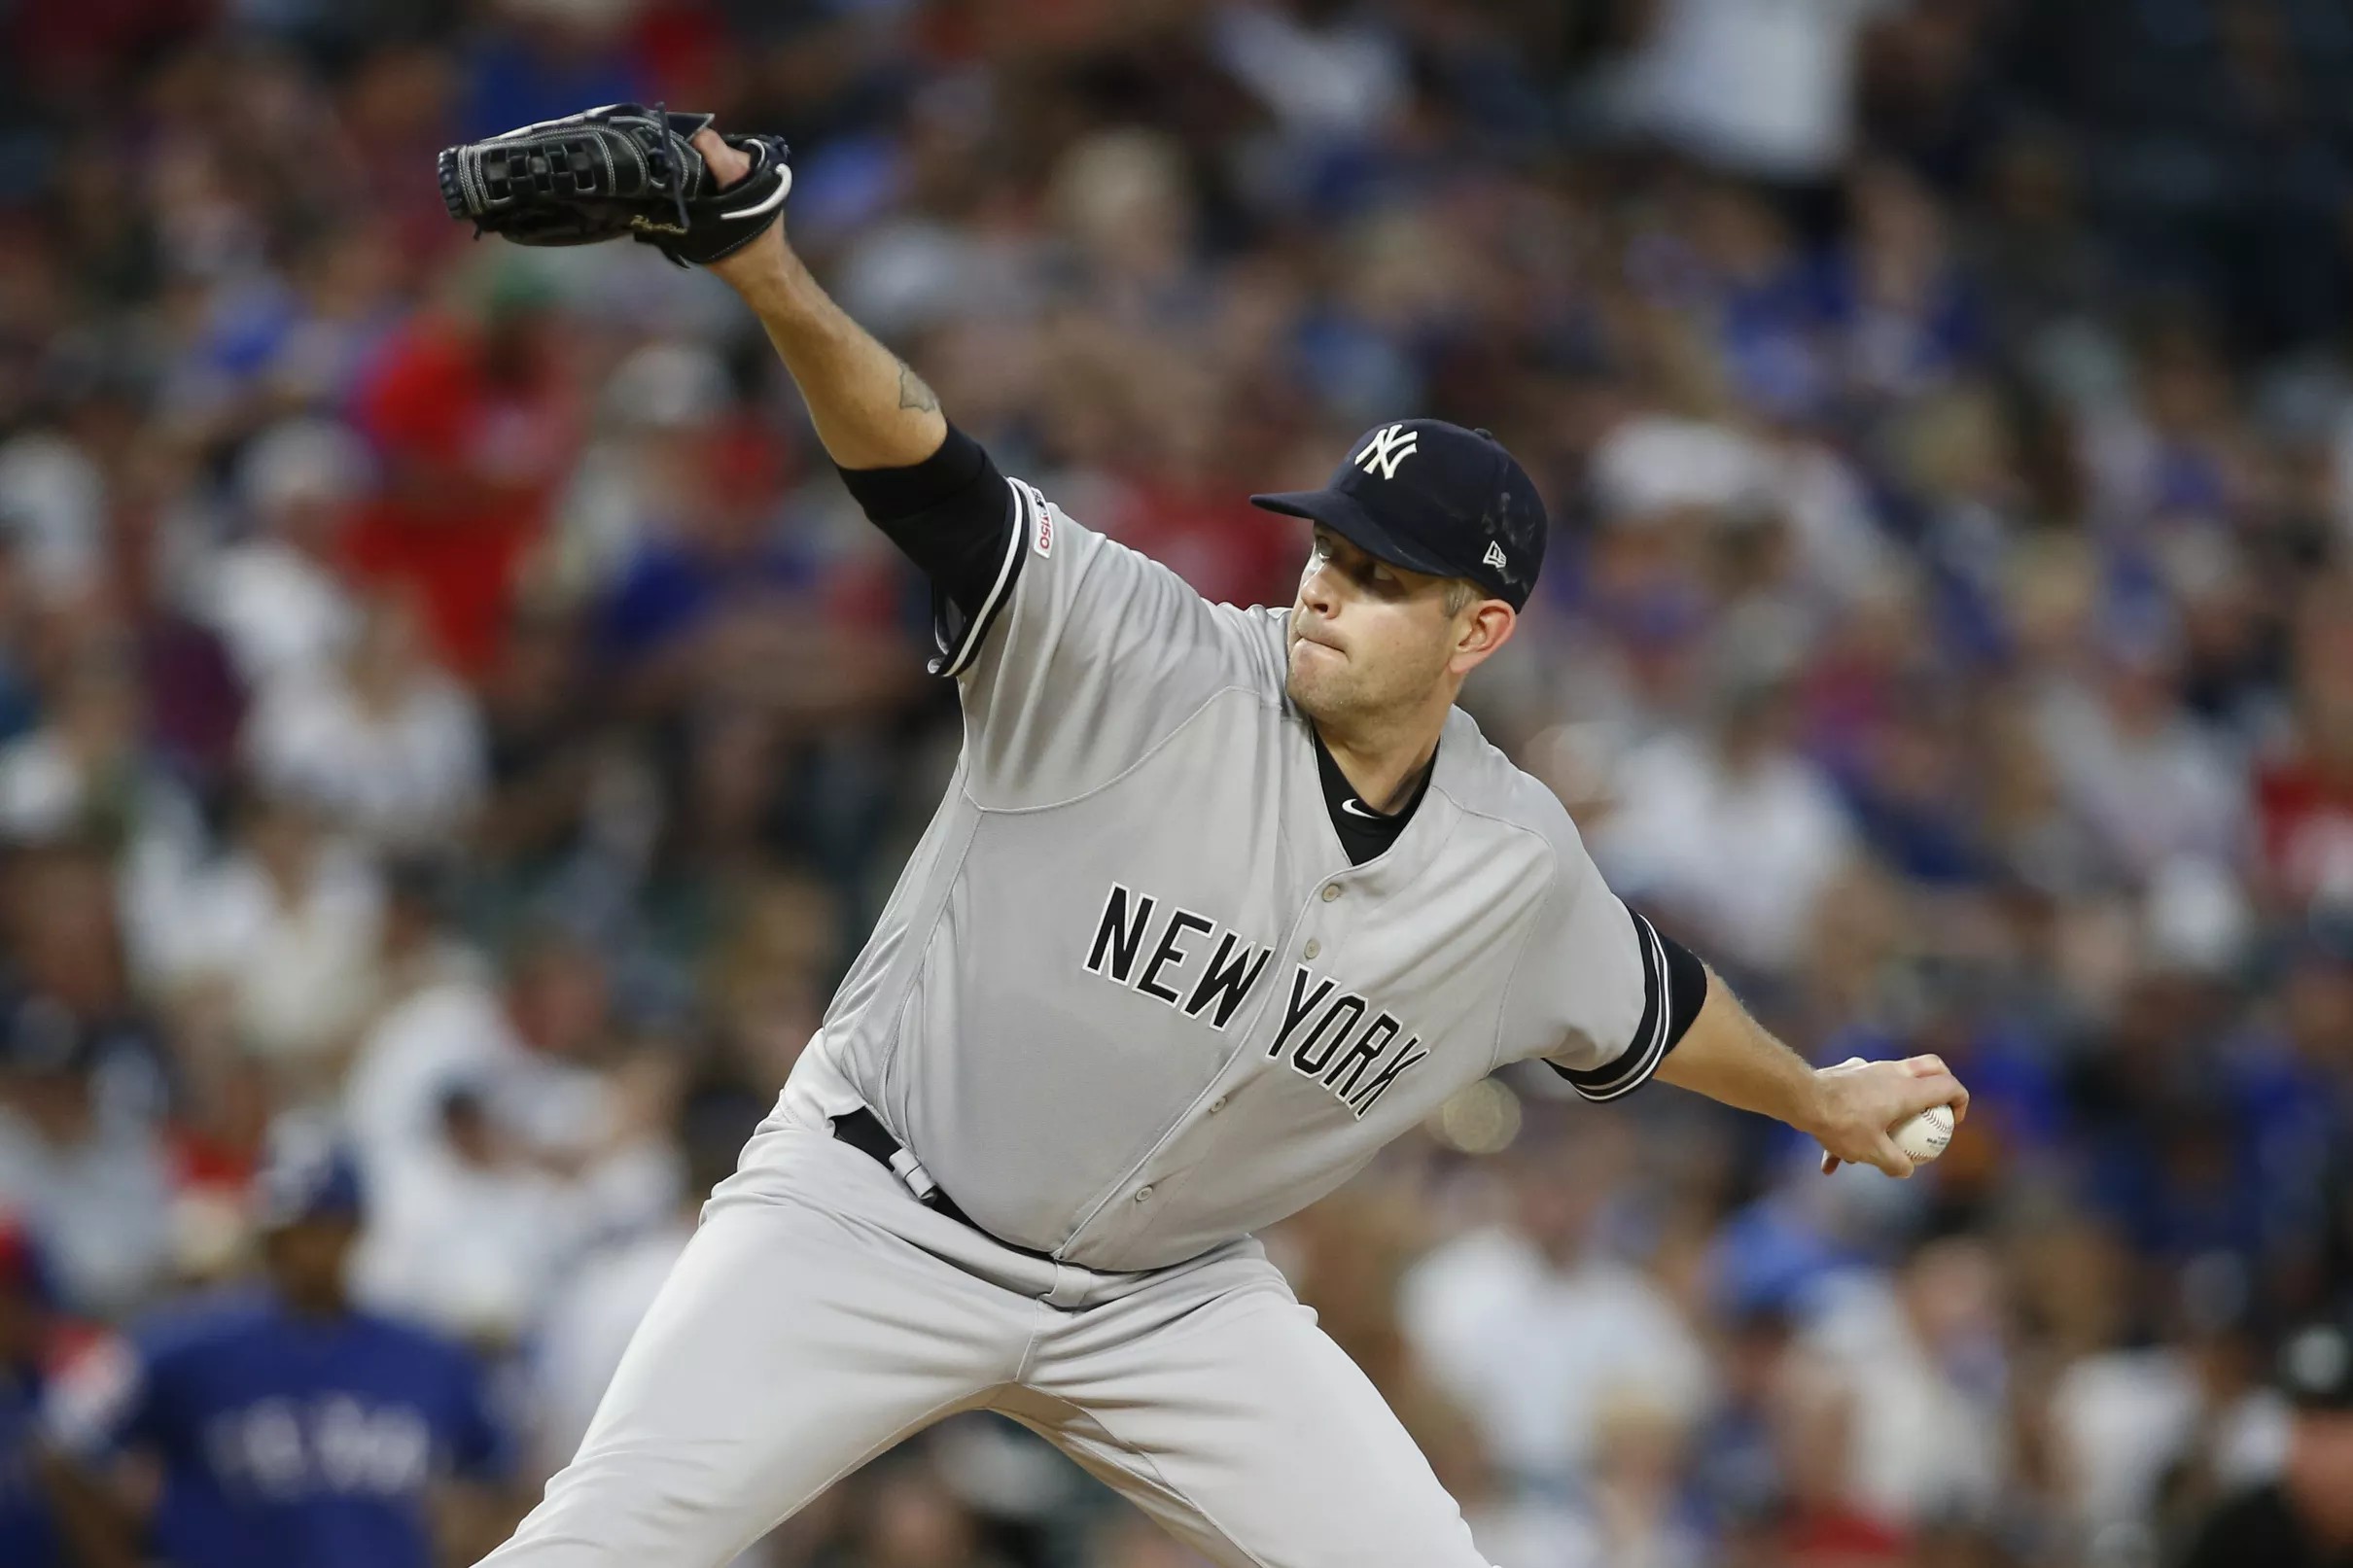 Yankees pitchers shouldn’t worry about their last few starts